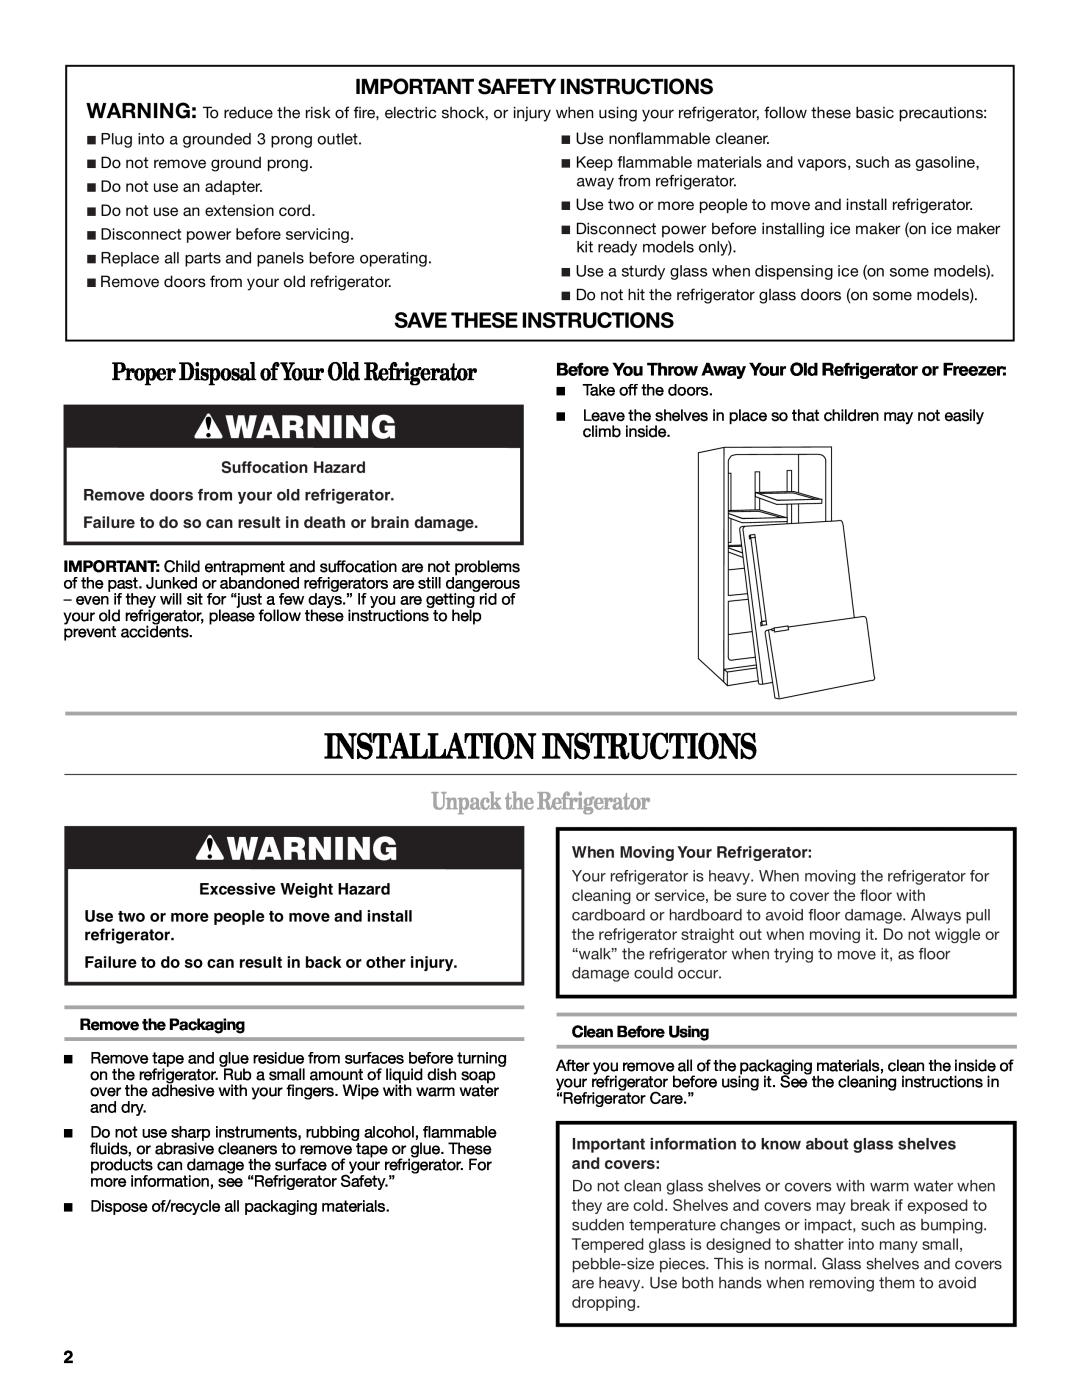 Whirlpool W10329360A Installation Instructions, Unpack the Refrigerator, Important Safety Instructions, Clean Before Using 